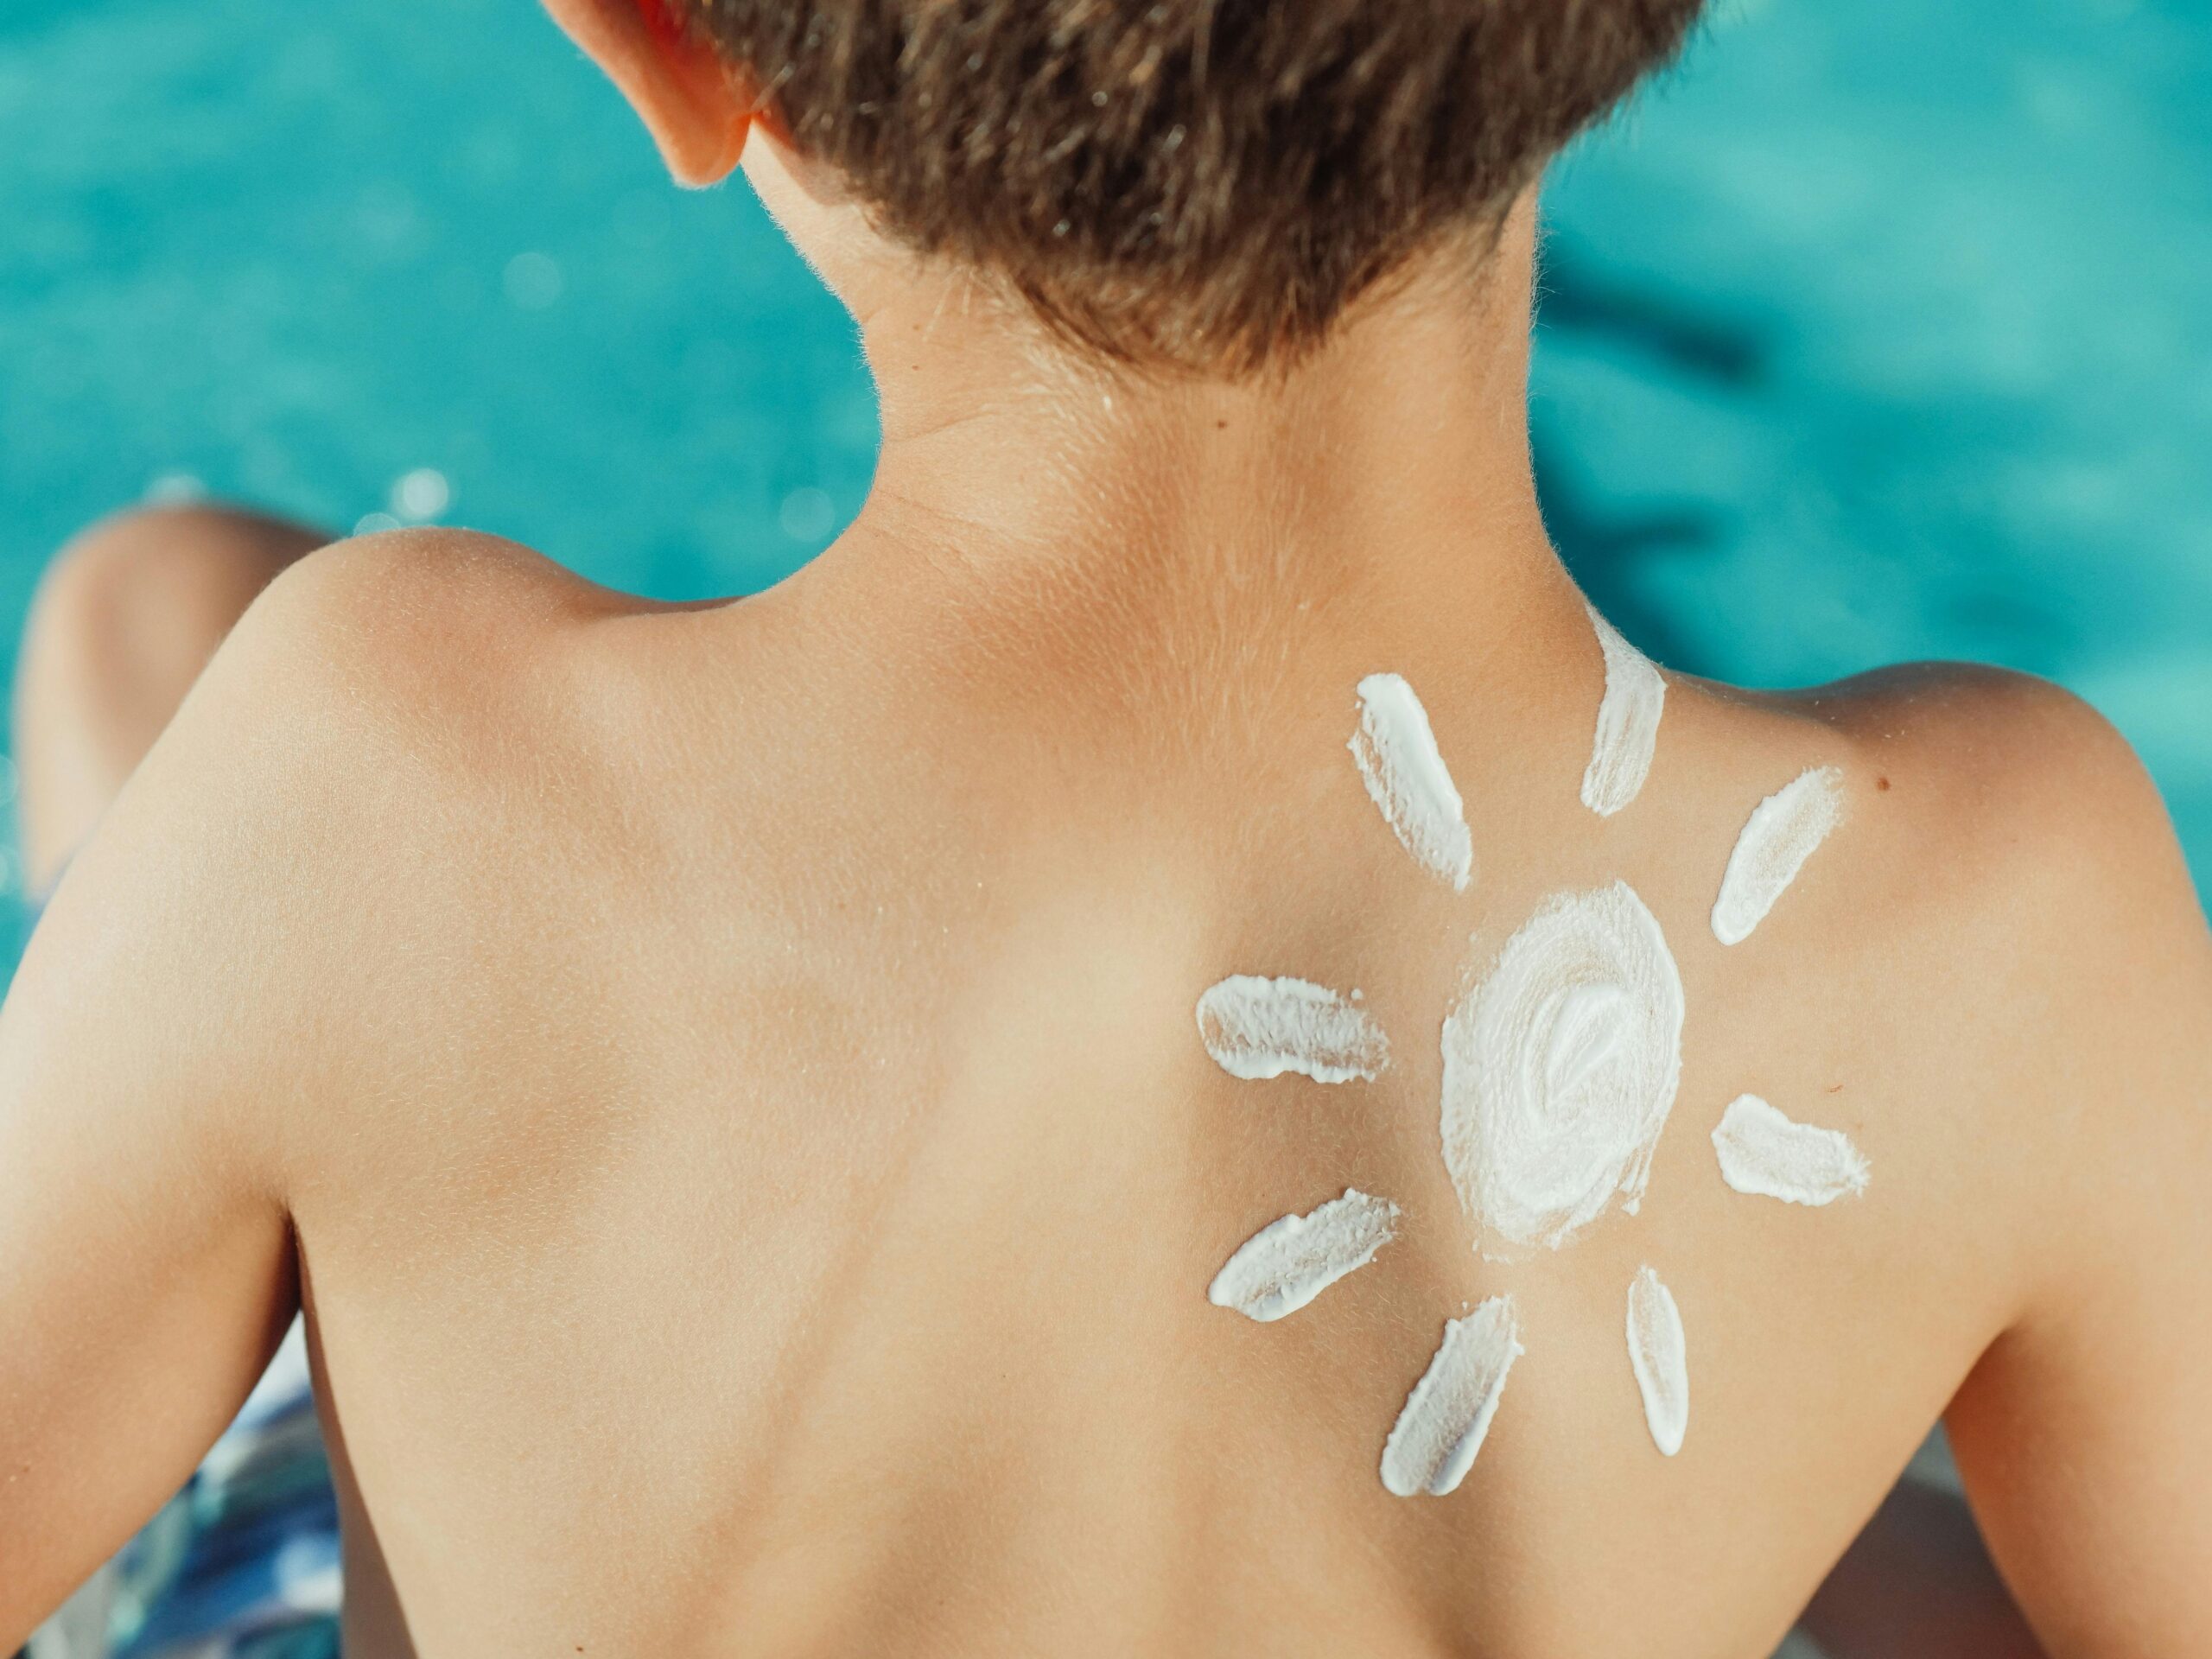 Dispelling the Myth: Applying Sunscreen is Harmful for Skin Health